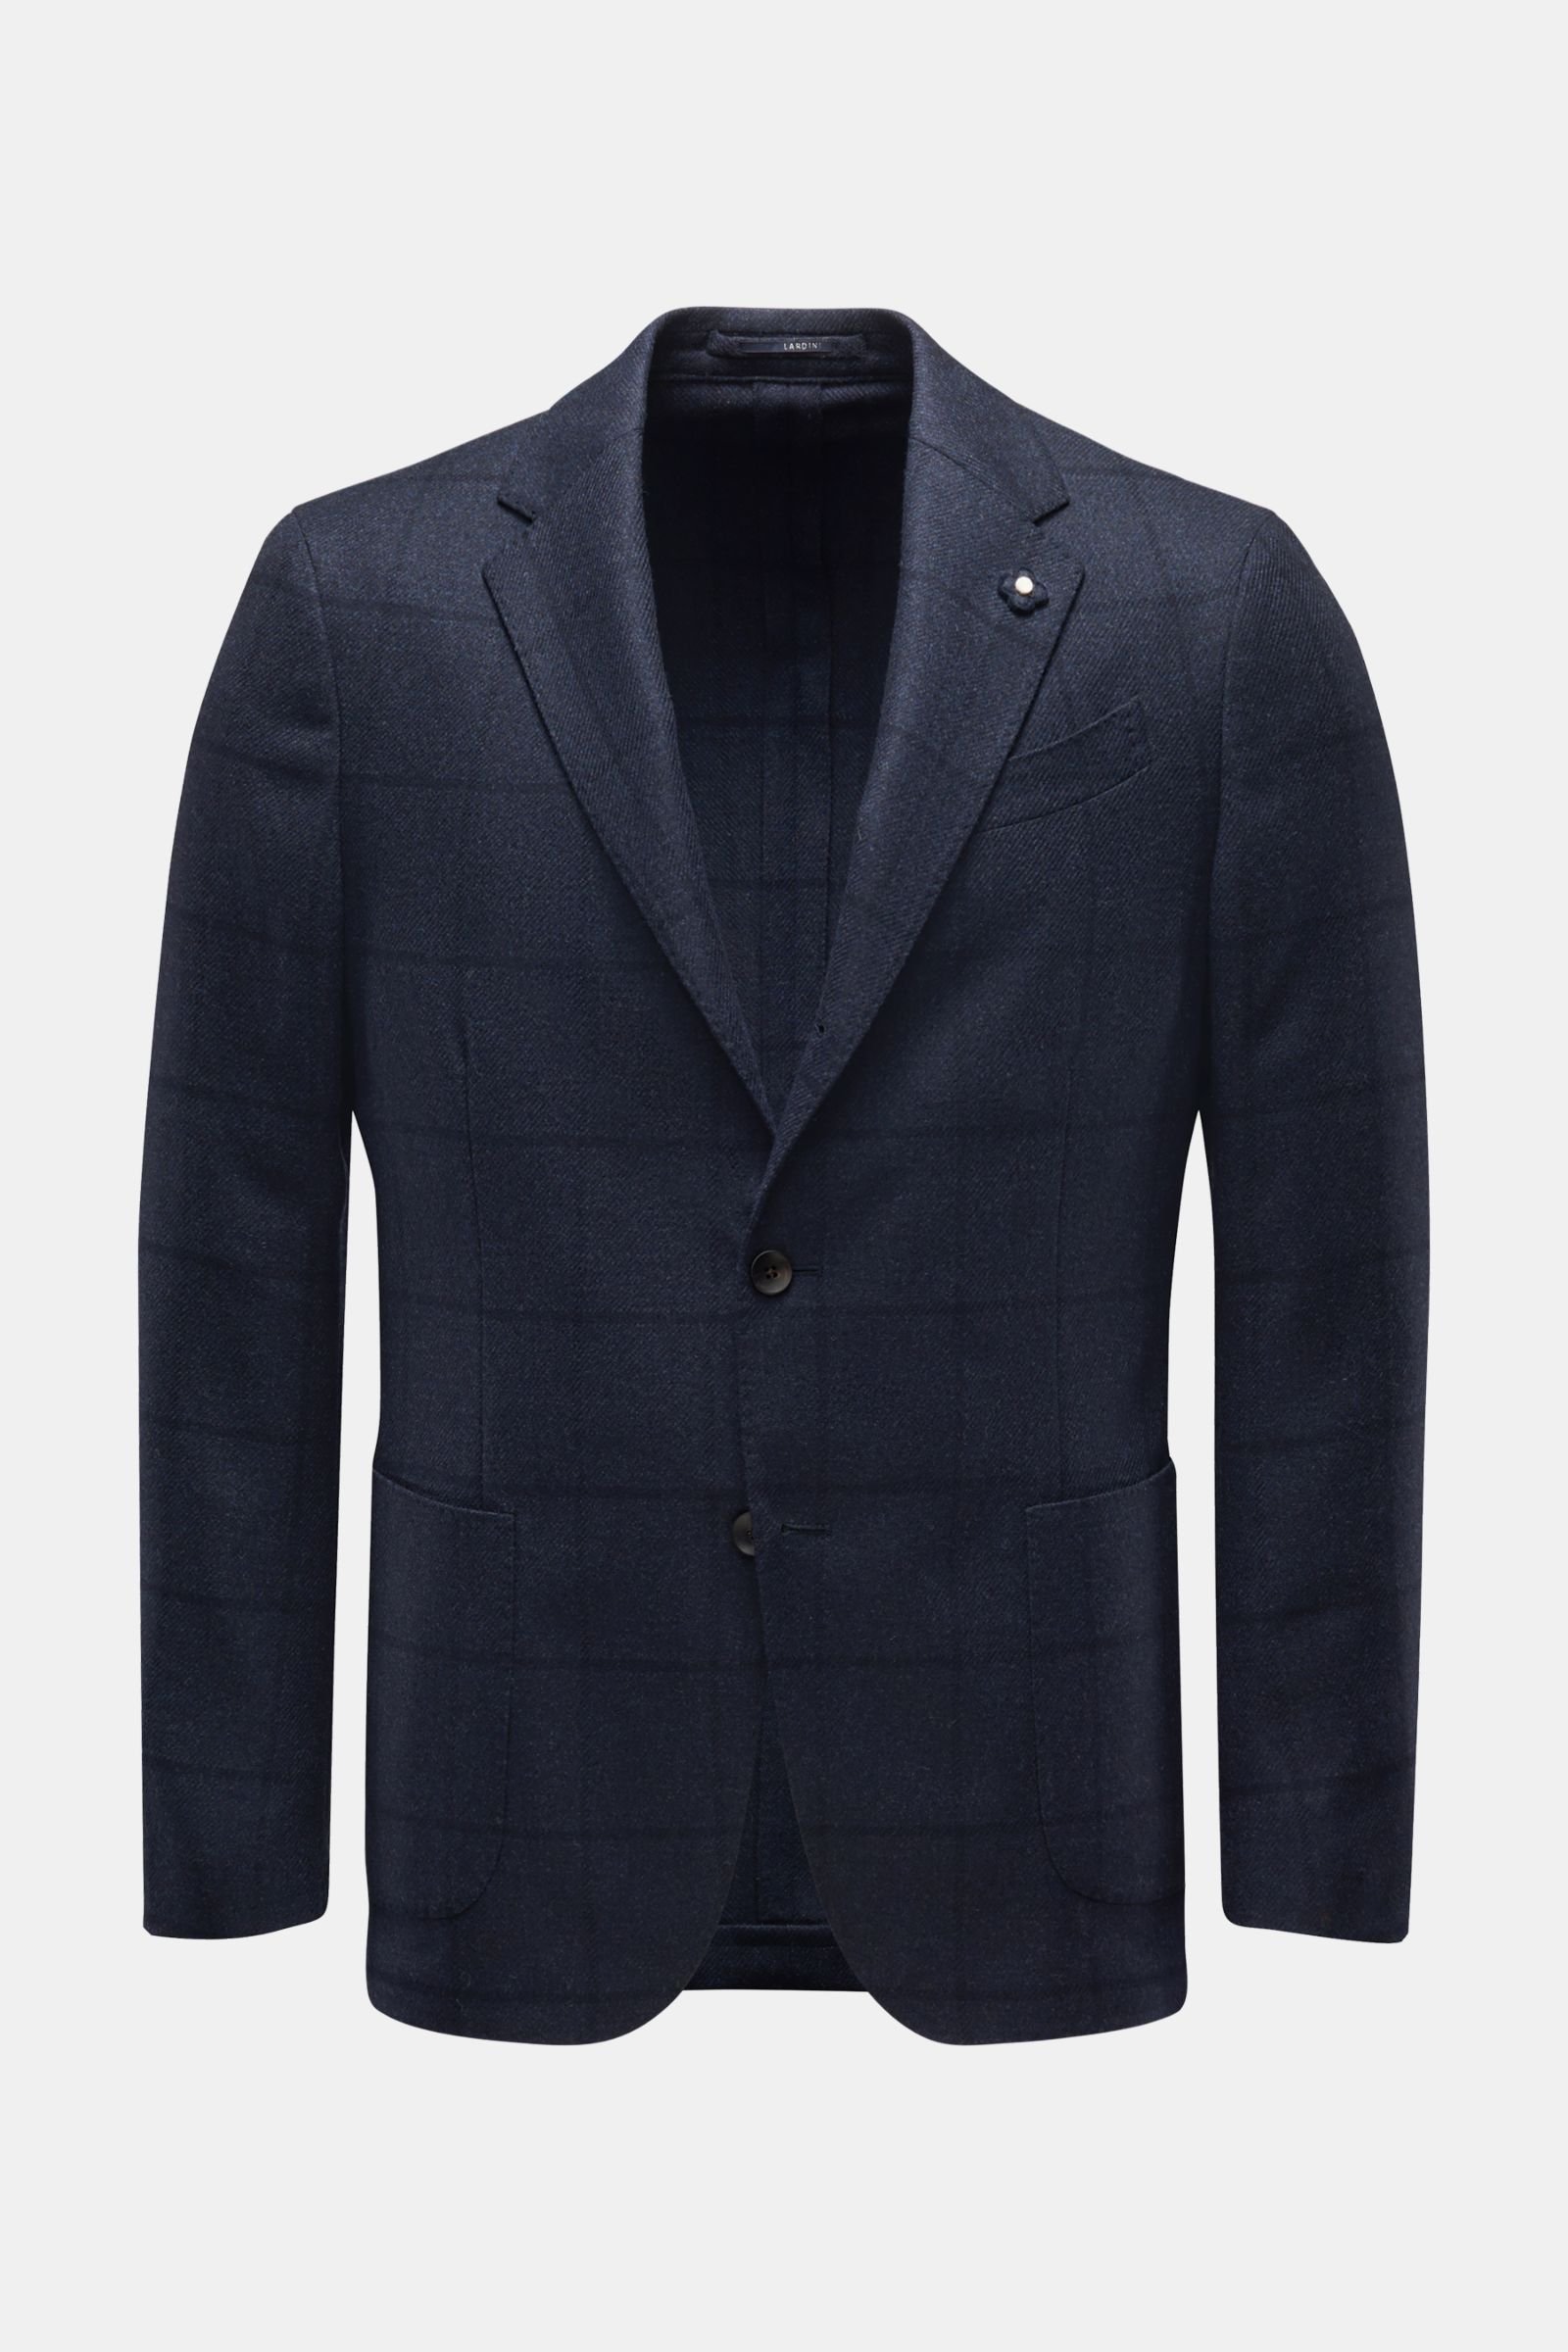 Smart-casual jacket navy checked